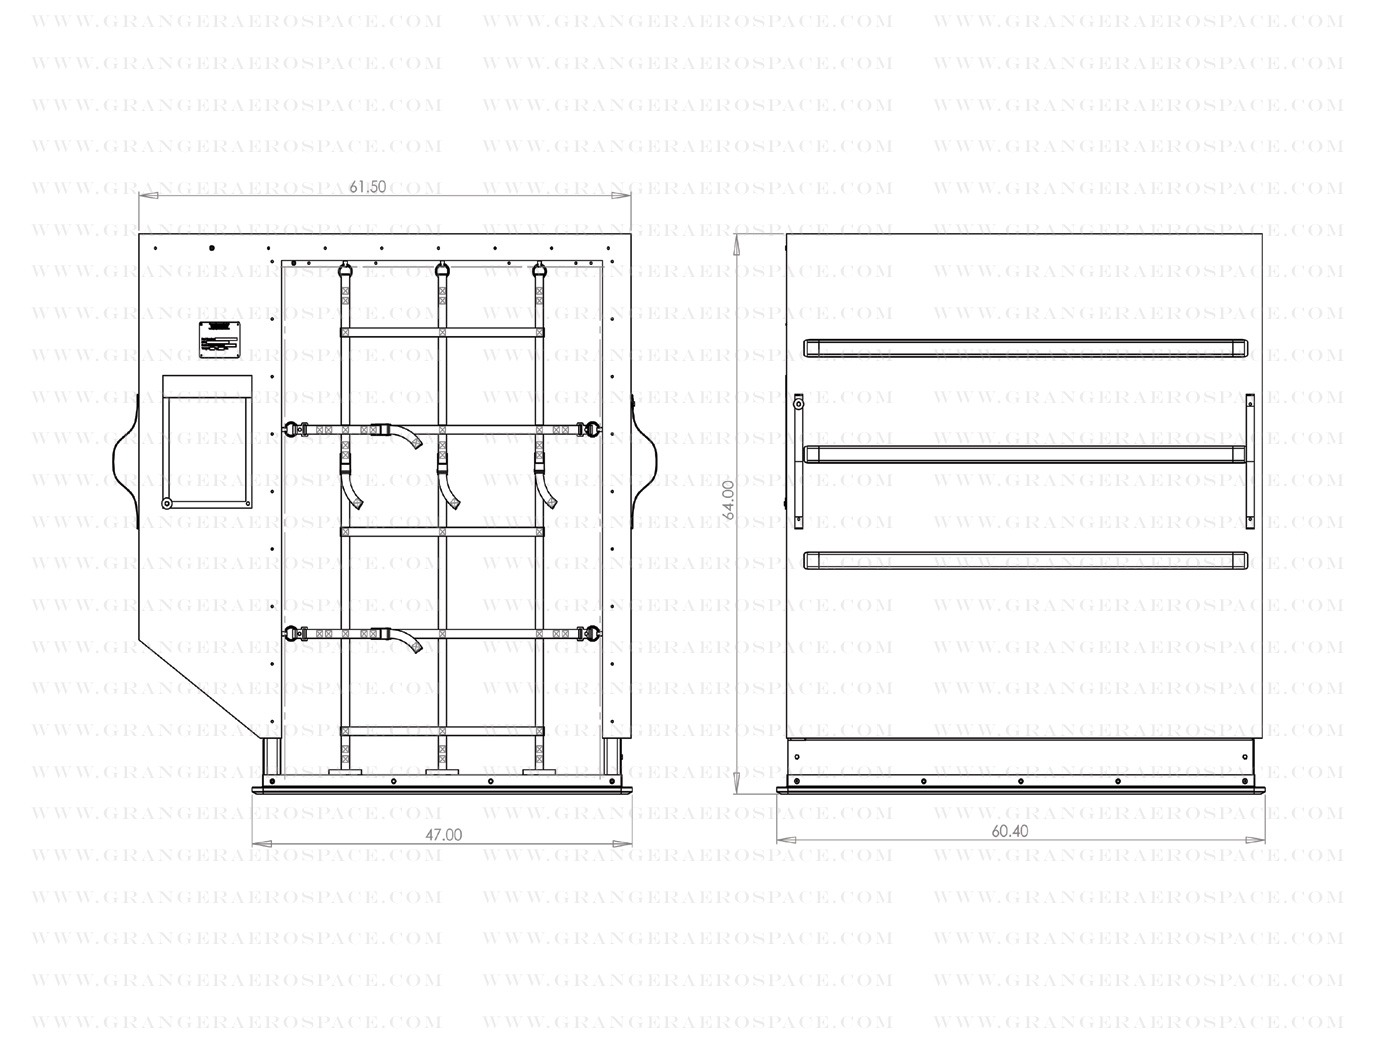 LD 2 Dimensions, LD 2 Air Cargo Container Dimensions, DPE dimensions